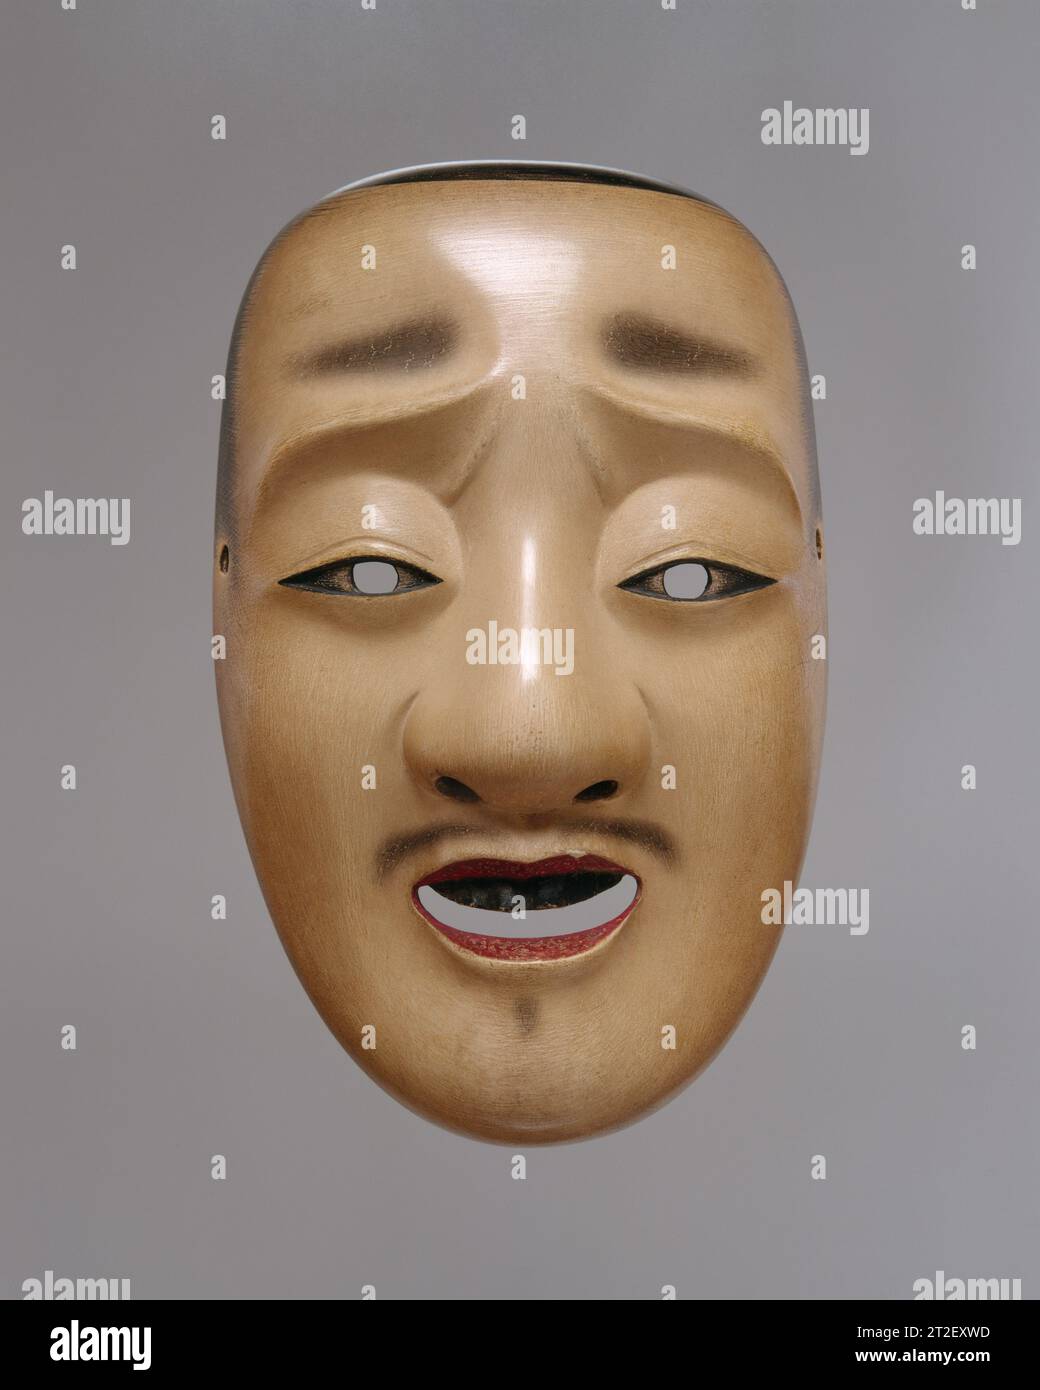 Ch?j? Noh Mask Genkyu Michinaga Japanese 18th century The Ch?j? mask portrays Heian-period poet and nobleman Ariwara no Narihira (Zai Go-ch?j?, 825–880). The expression represents that of an elegant, graceful aristocrat; however, the furrow on his forehead expresses grief. The mask could be worn for the role of a handsome young nobleman or that of an aristocratic warrior of the Heike clan who dies on the battlefield. View more. Ch?j? Noh Mask. Genkyu Michinaga (Japanese, active second half of the 17th century). Japan. 18th century. Cypress wood with white, black, and red pigments. Edo period ( Stock Photo